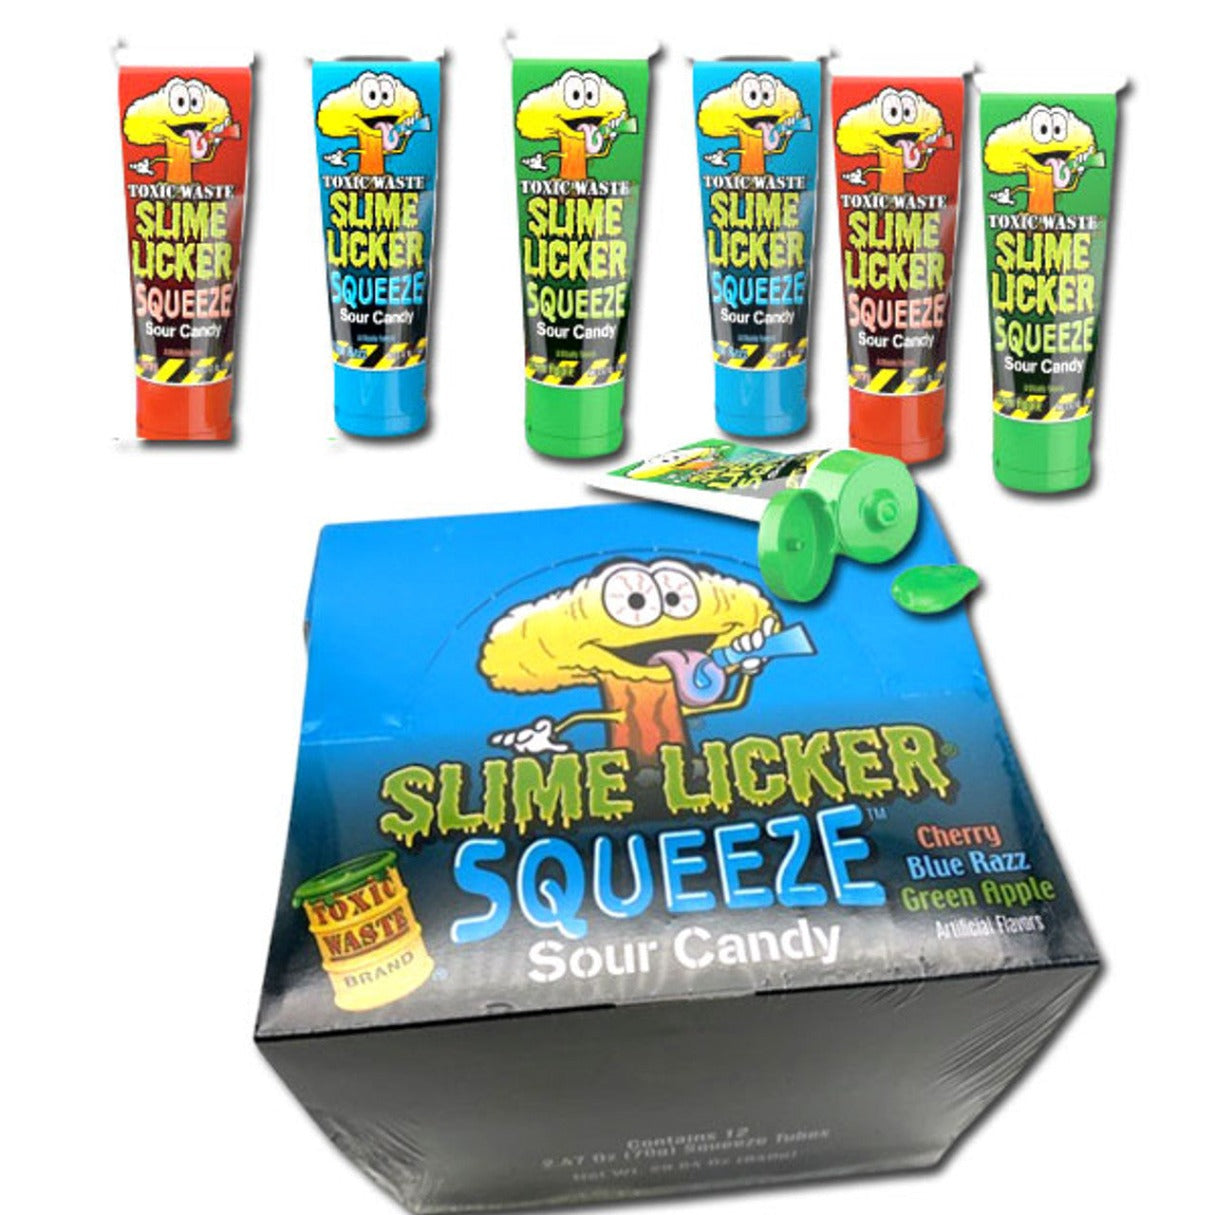 Toxic Waste Slime Licker Squeeze 2.47oz - 12ct